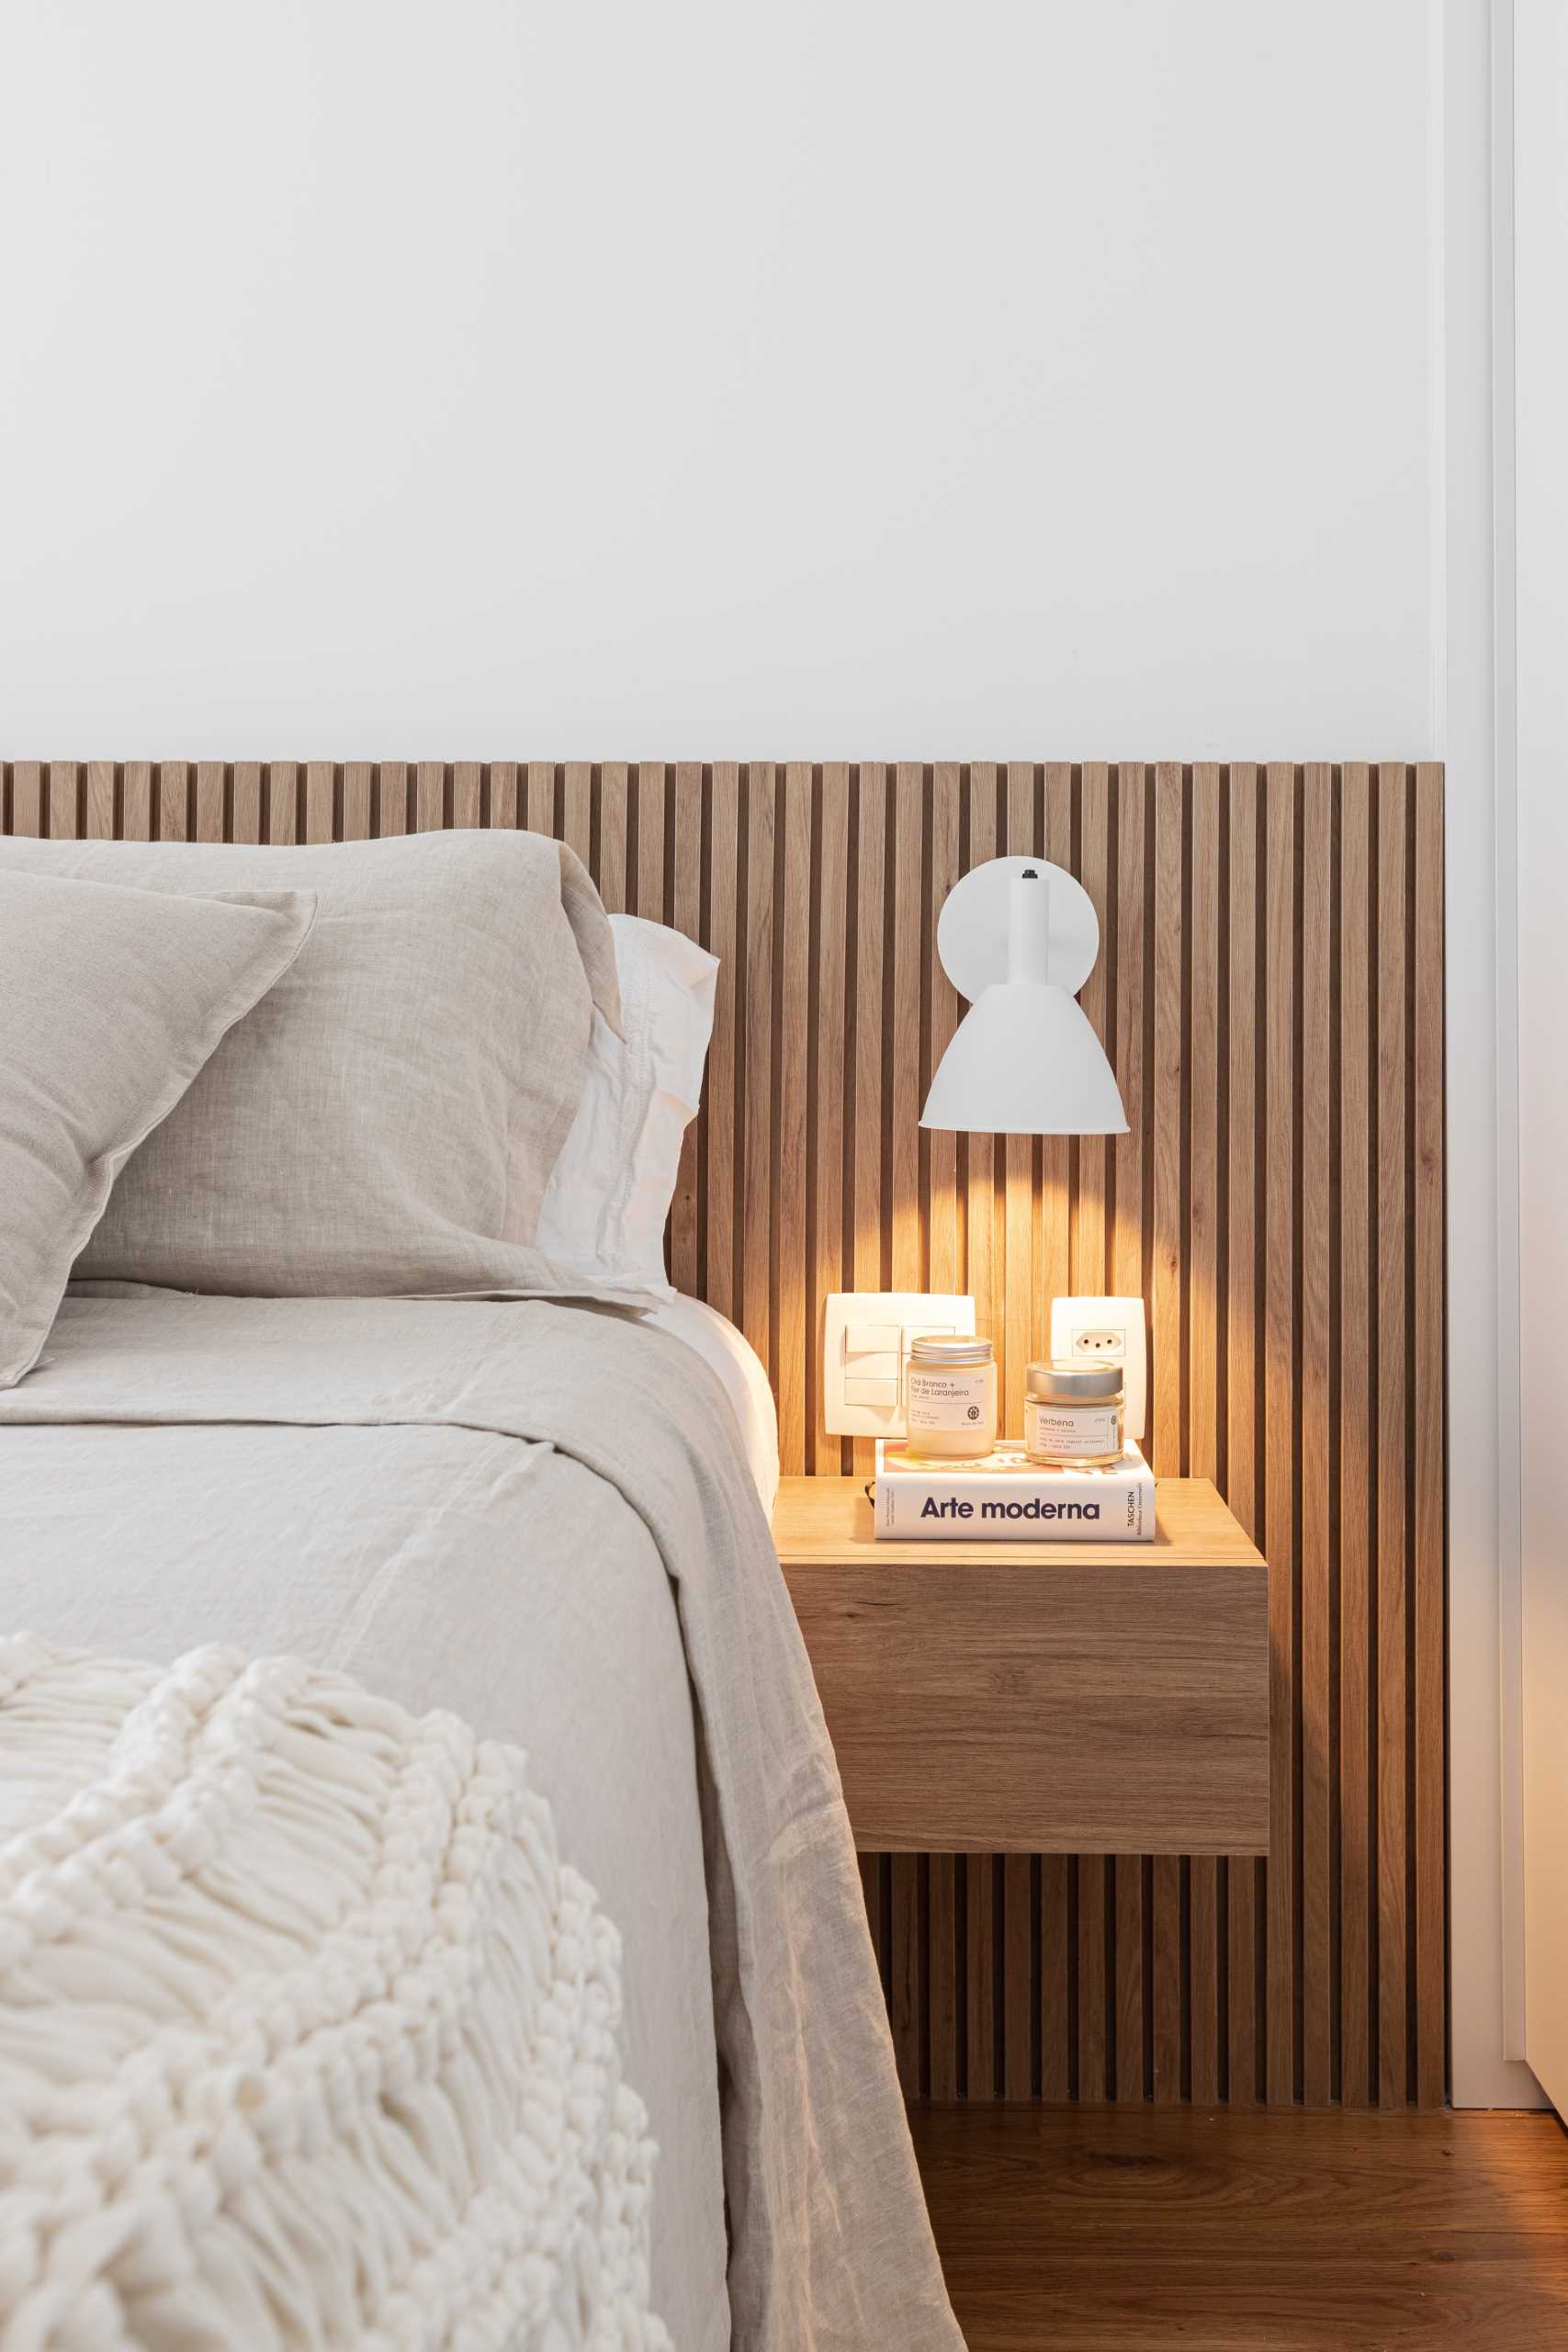 This modern bedroom includes hidden lighting behind the wood headboard, as well as wall-mounted bedside lamps and floating bedside tables.